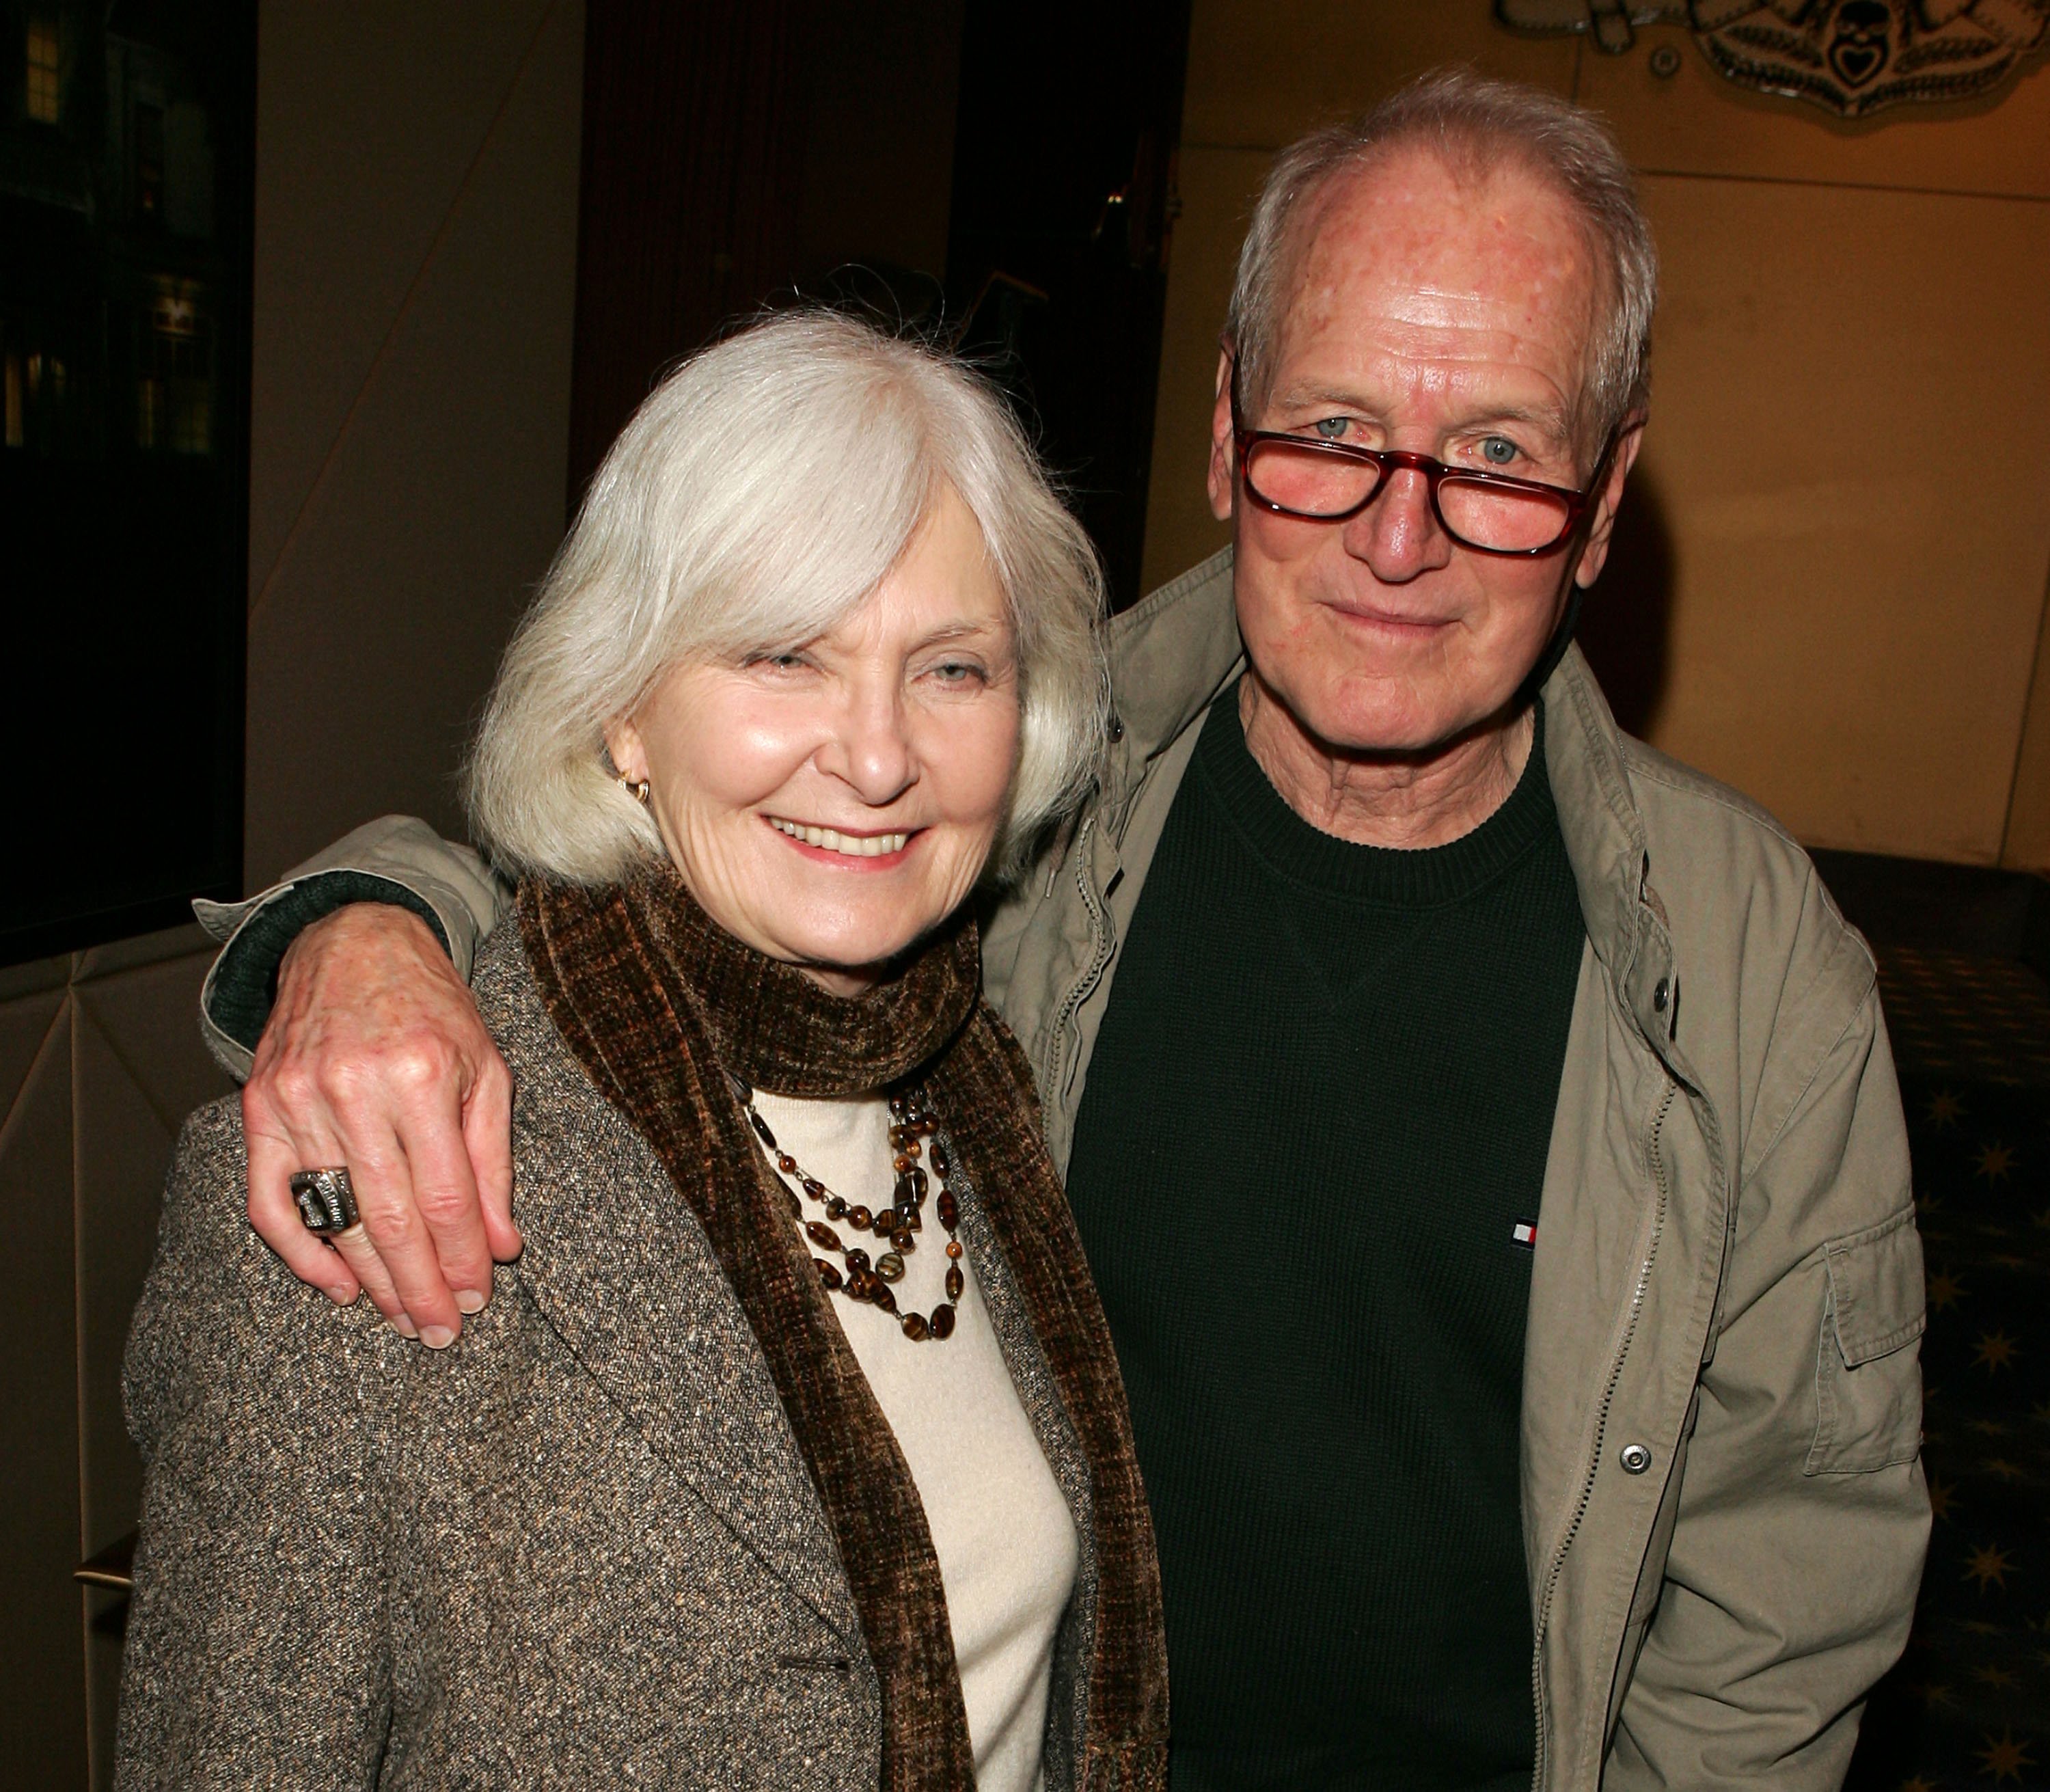 Joanne Woodward and Paul Newman attend the special screening of "The Woodsman" on January 10, 2004, in New York City. | Source: Getty Images